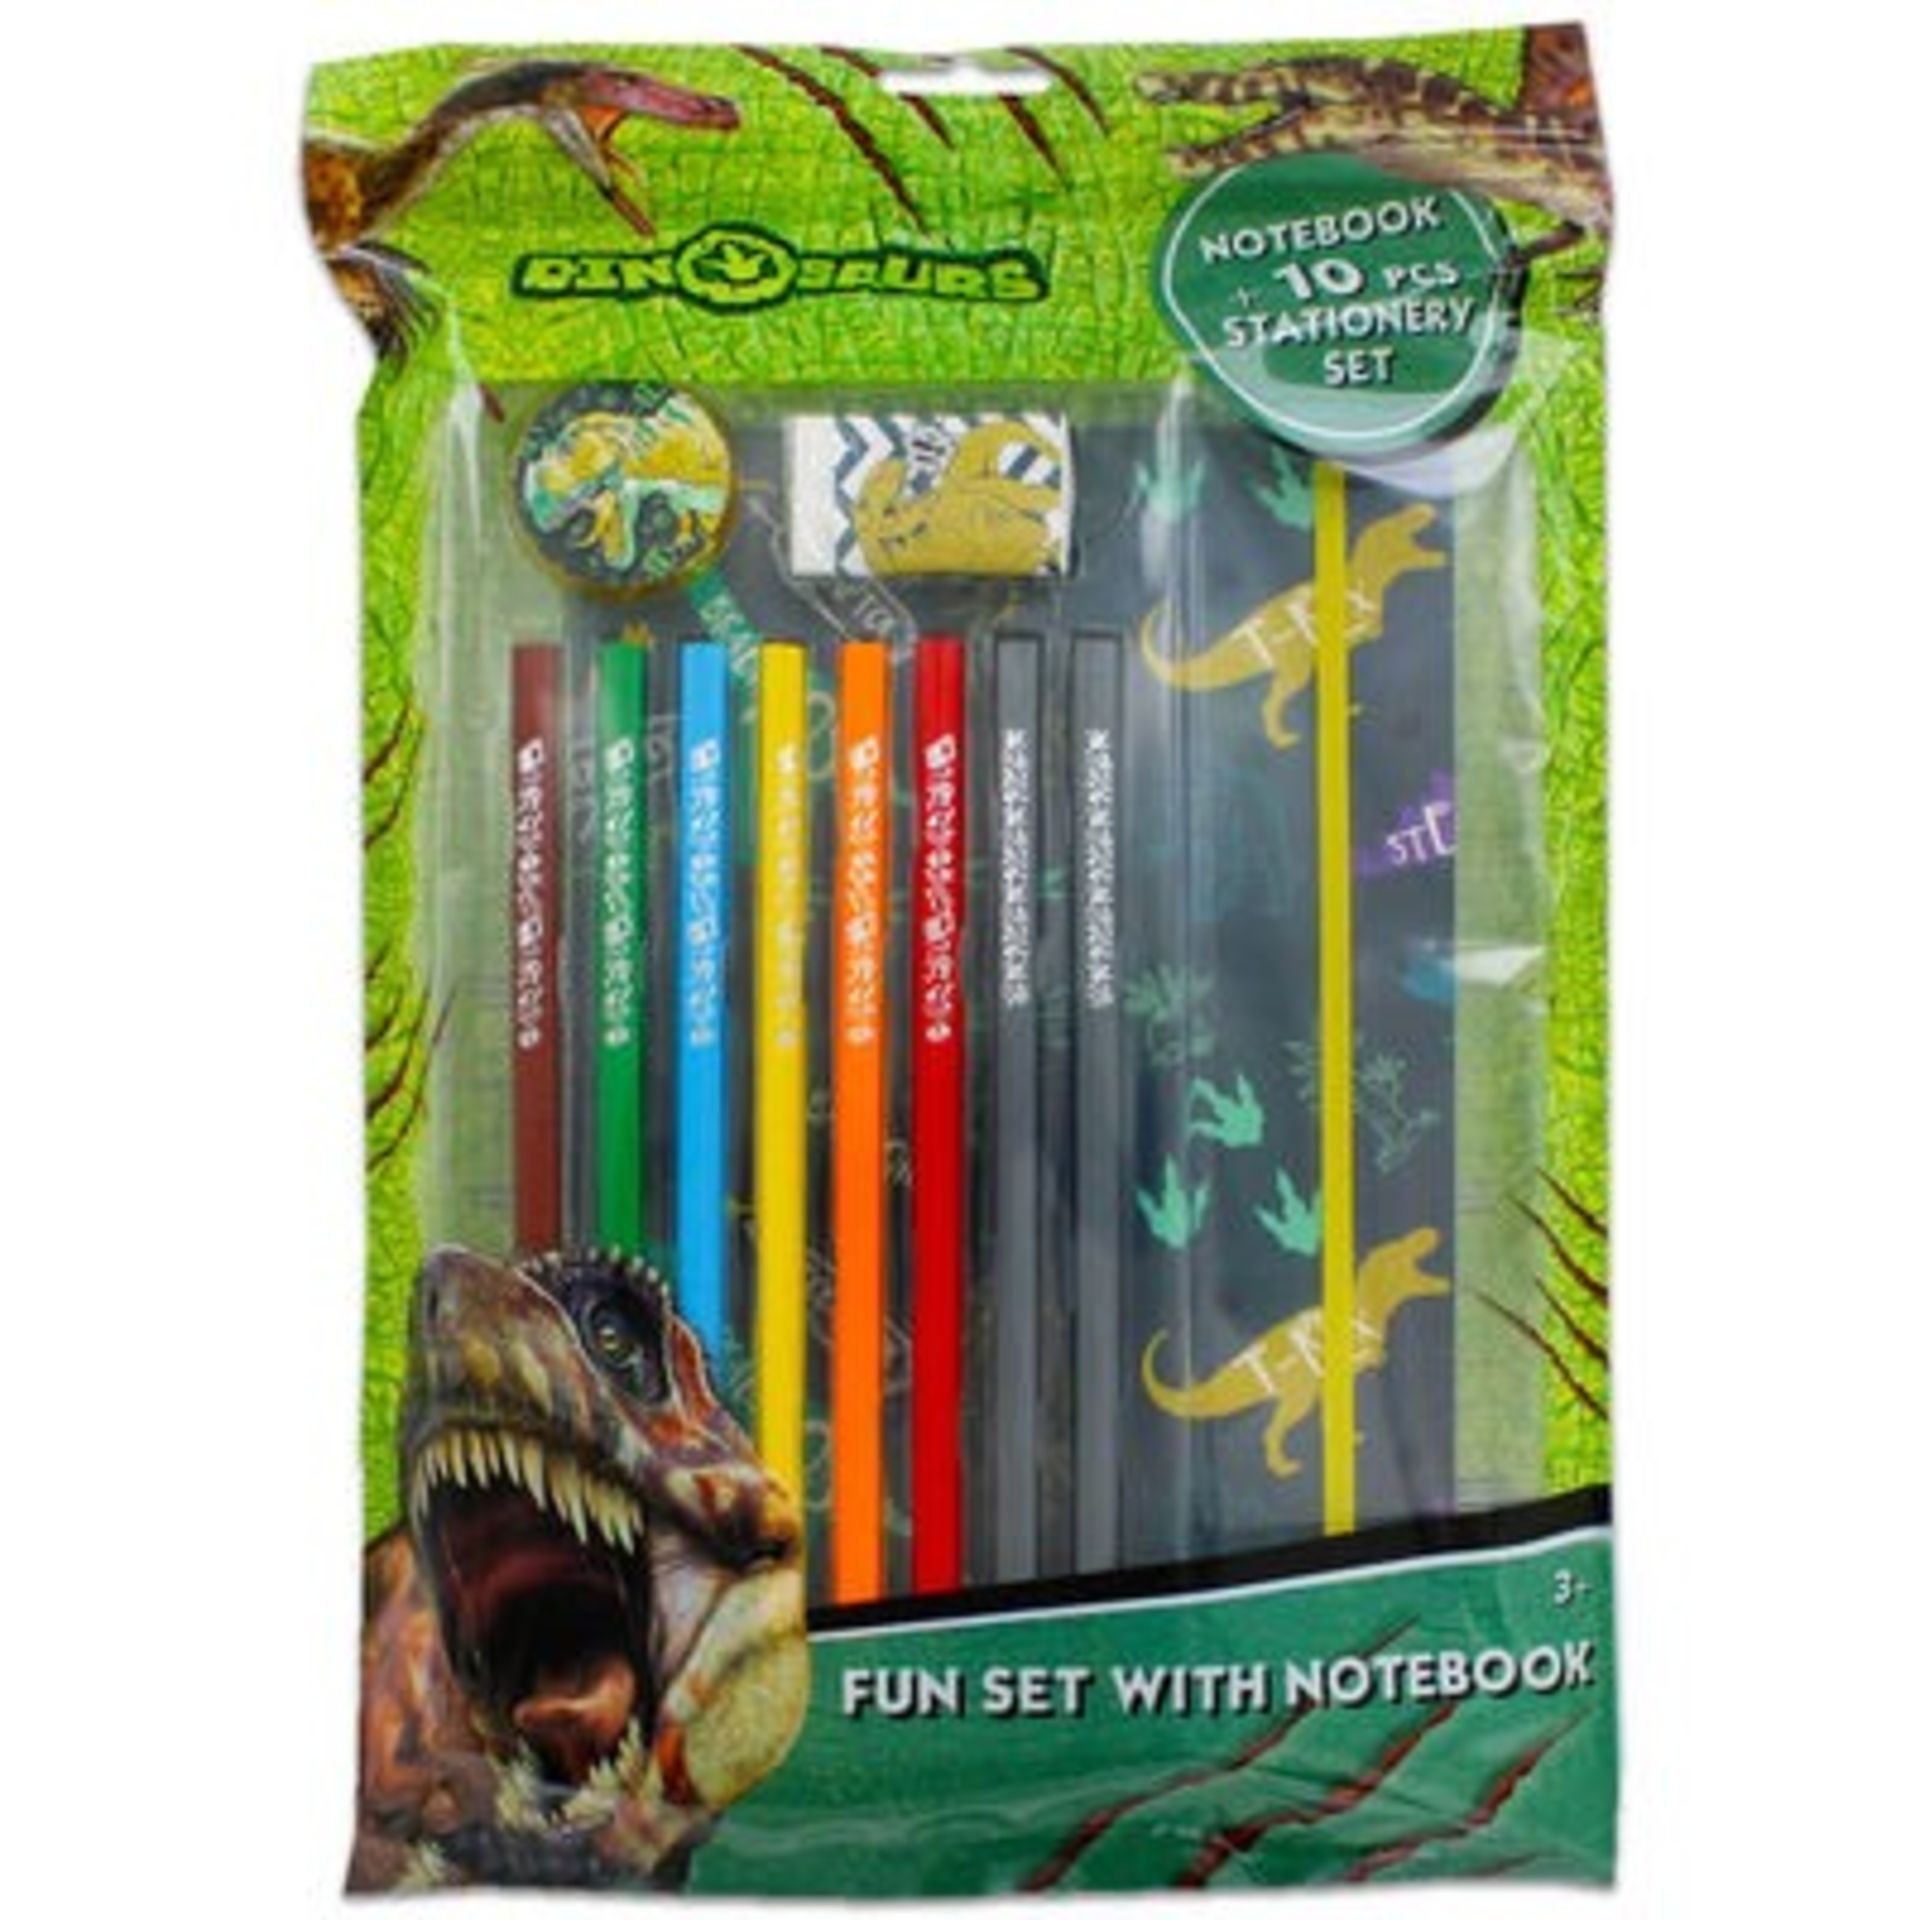 New Dinosaur Notebook With 10pc Stationery Set